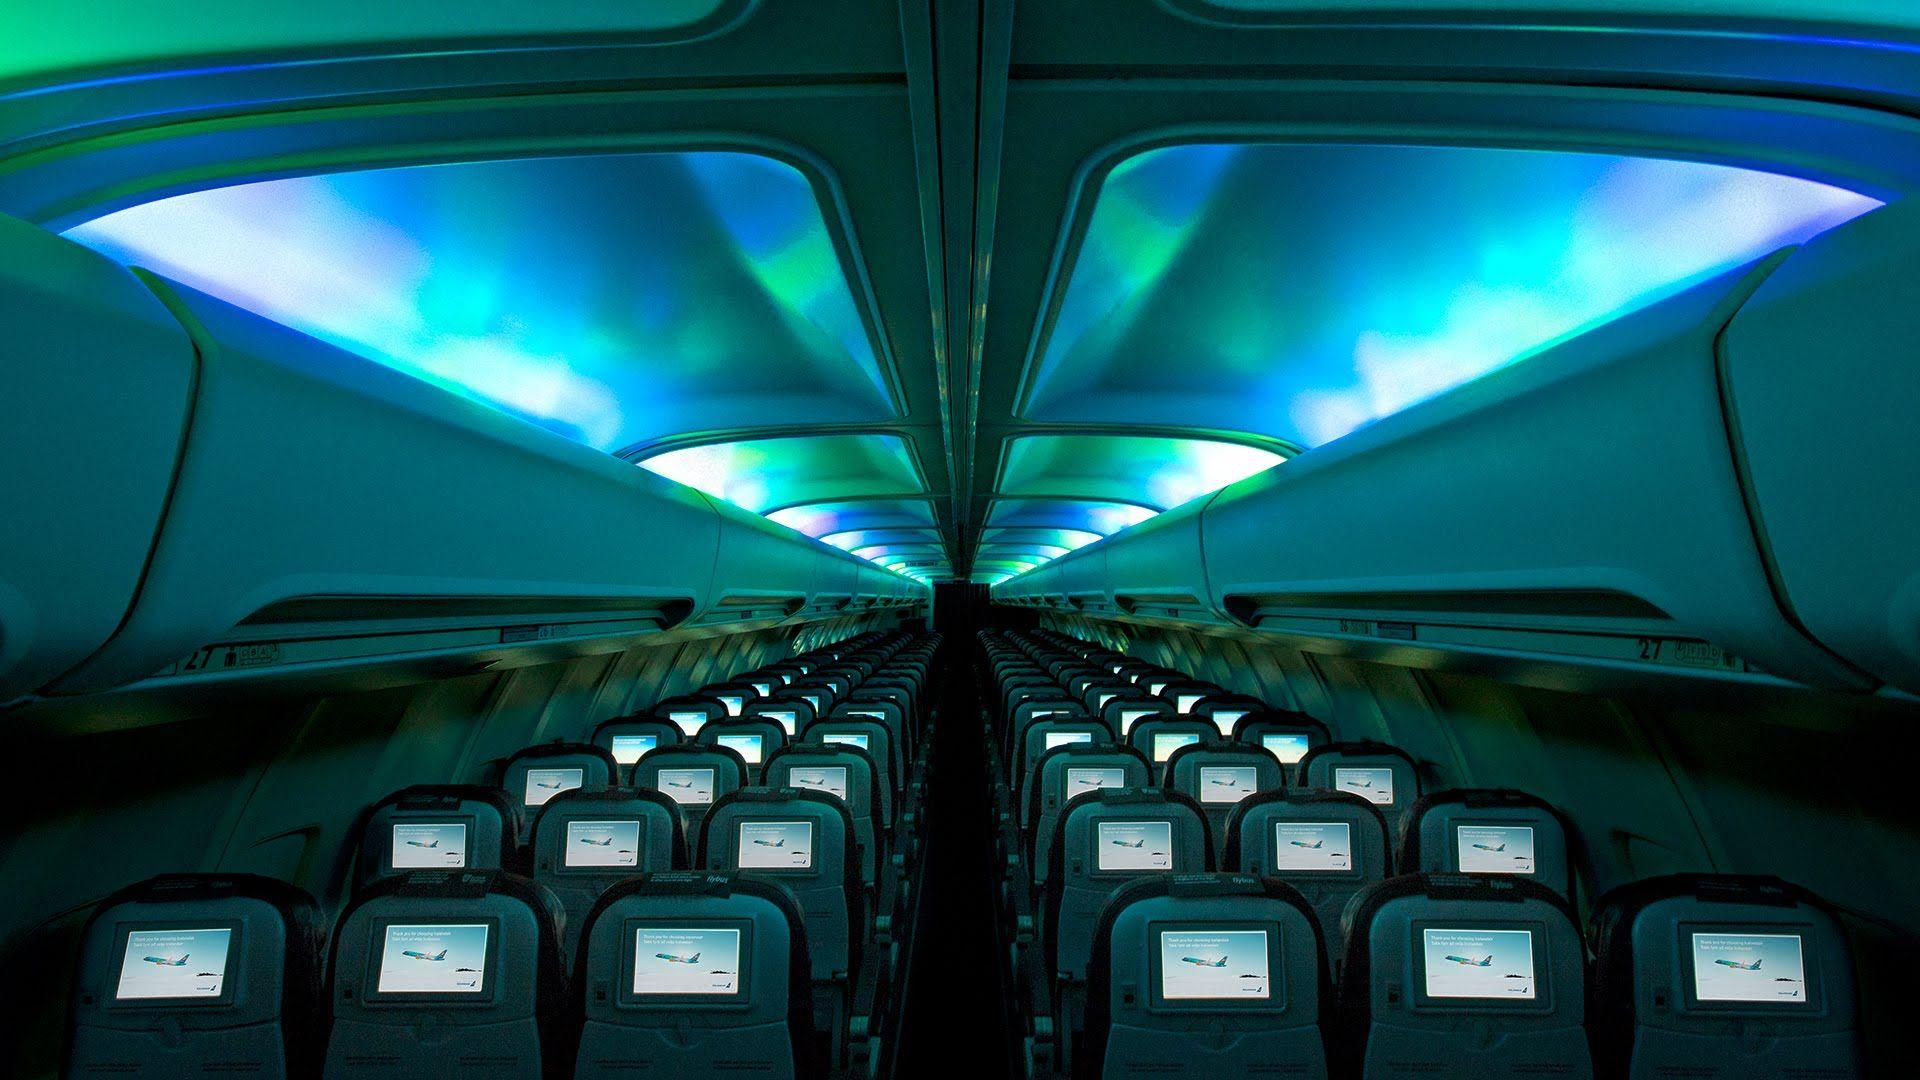 Have you seen inside the world's first northern lights plane